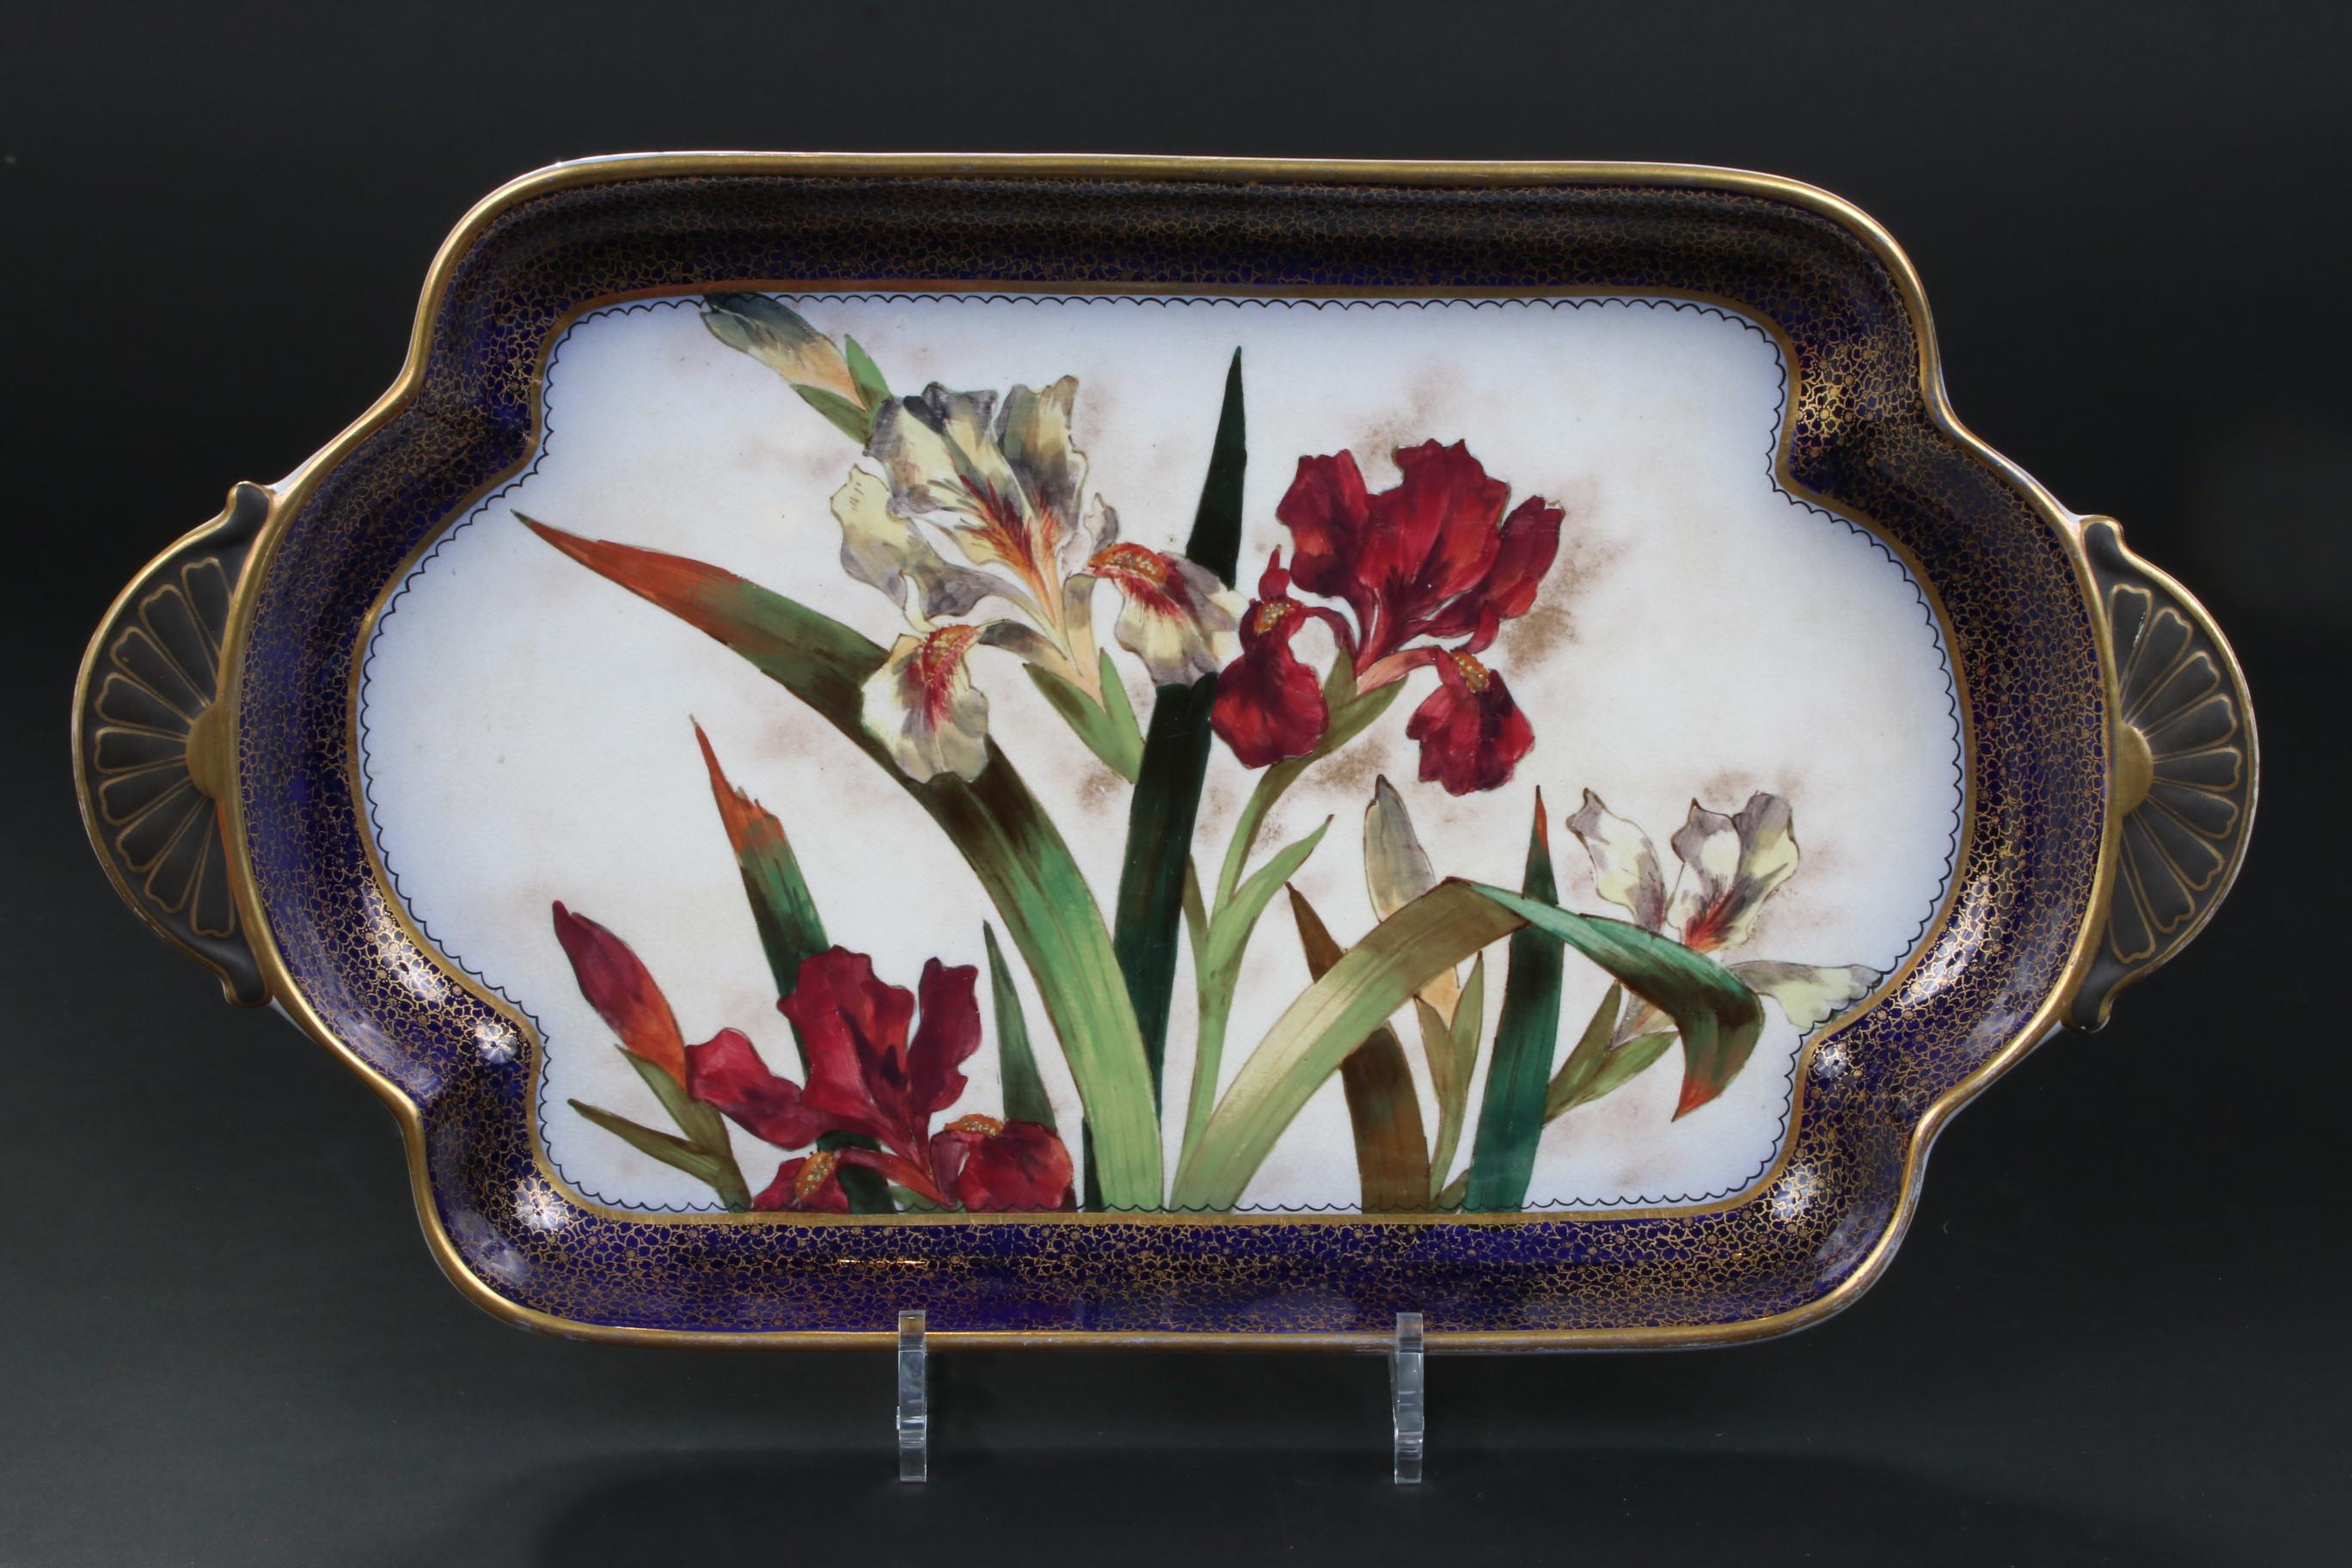 Lovely Doulton Burslem, England, hand painted dessert set: 1 rectangular tray and 8 small square plates. Depicts red and white irises and primroses, surrounded by a cobalt blue and gold border. Each item is hand painted with a different design. This